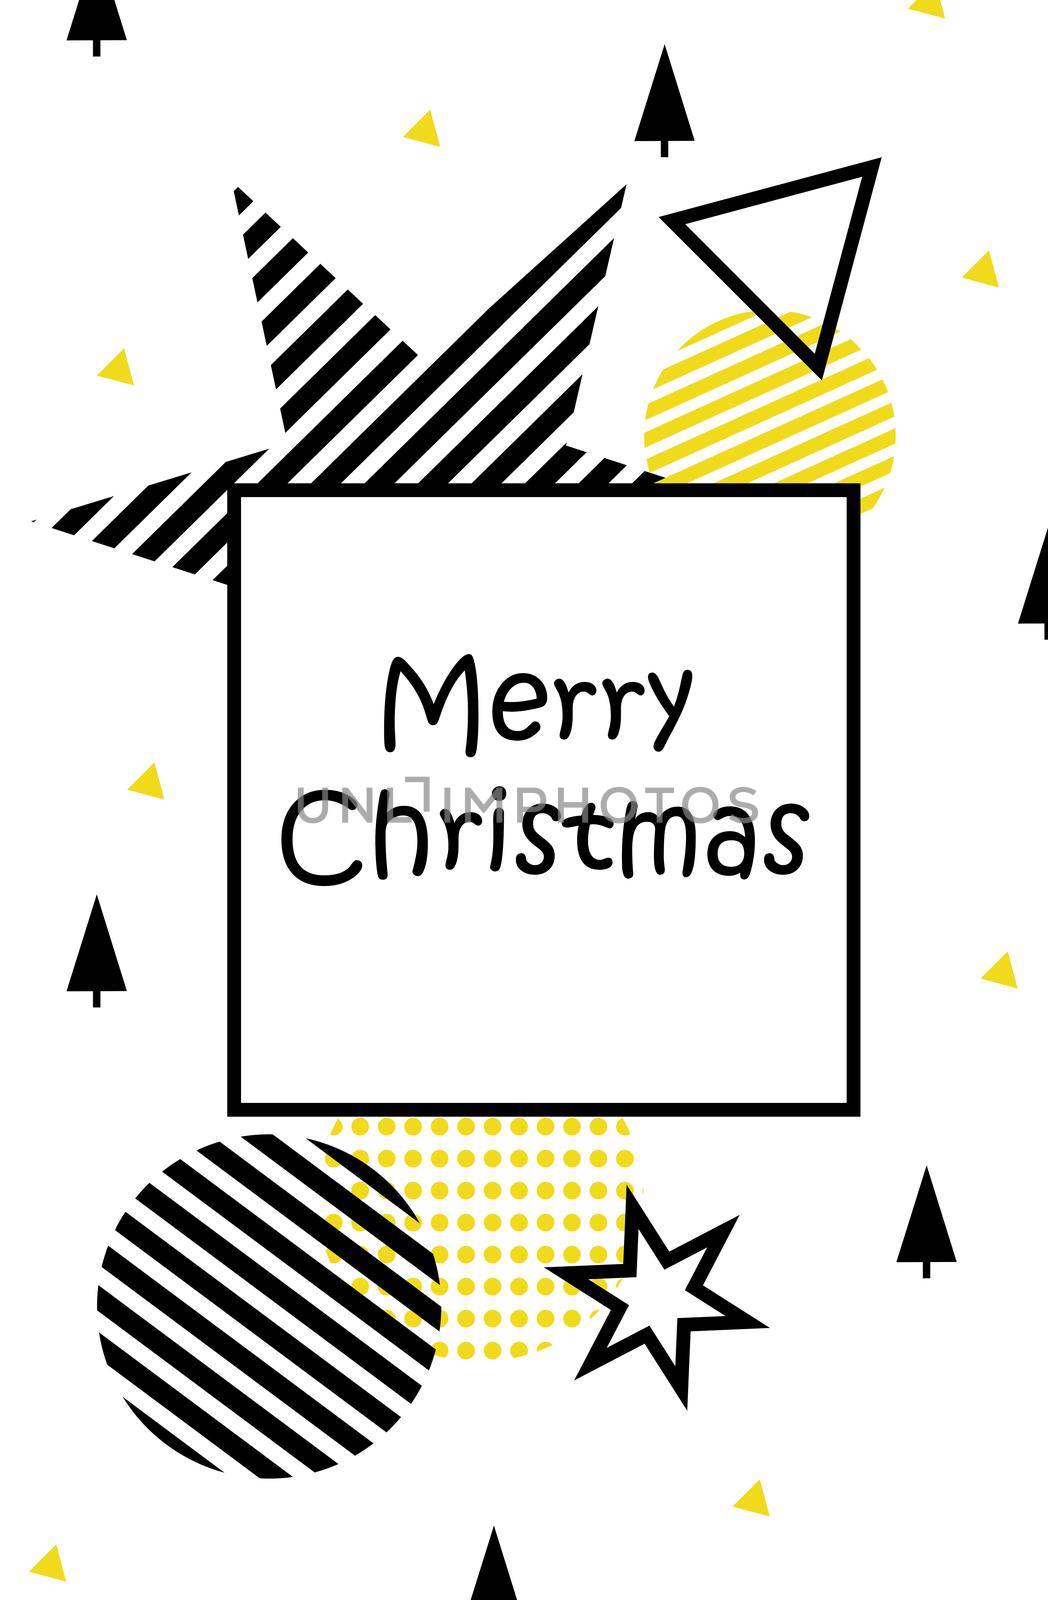 Happy New Year. Merry Christmas. Illustration festive with Christmas balls, stars. On a white background, black and yellow Christmas decorations. by nazarovsergey